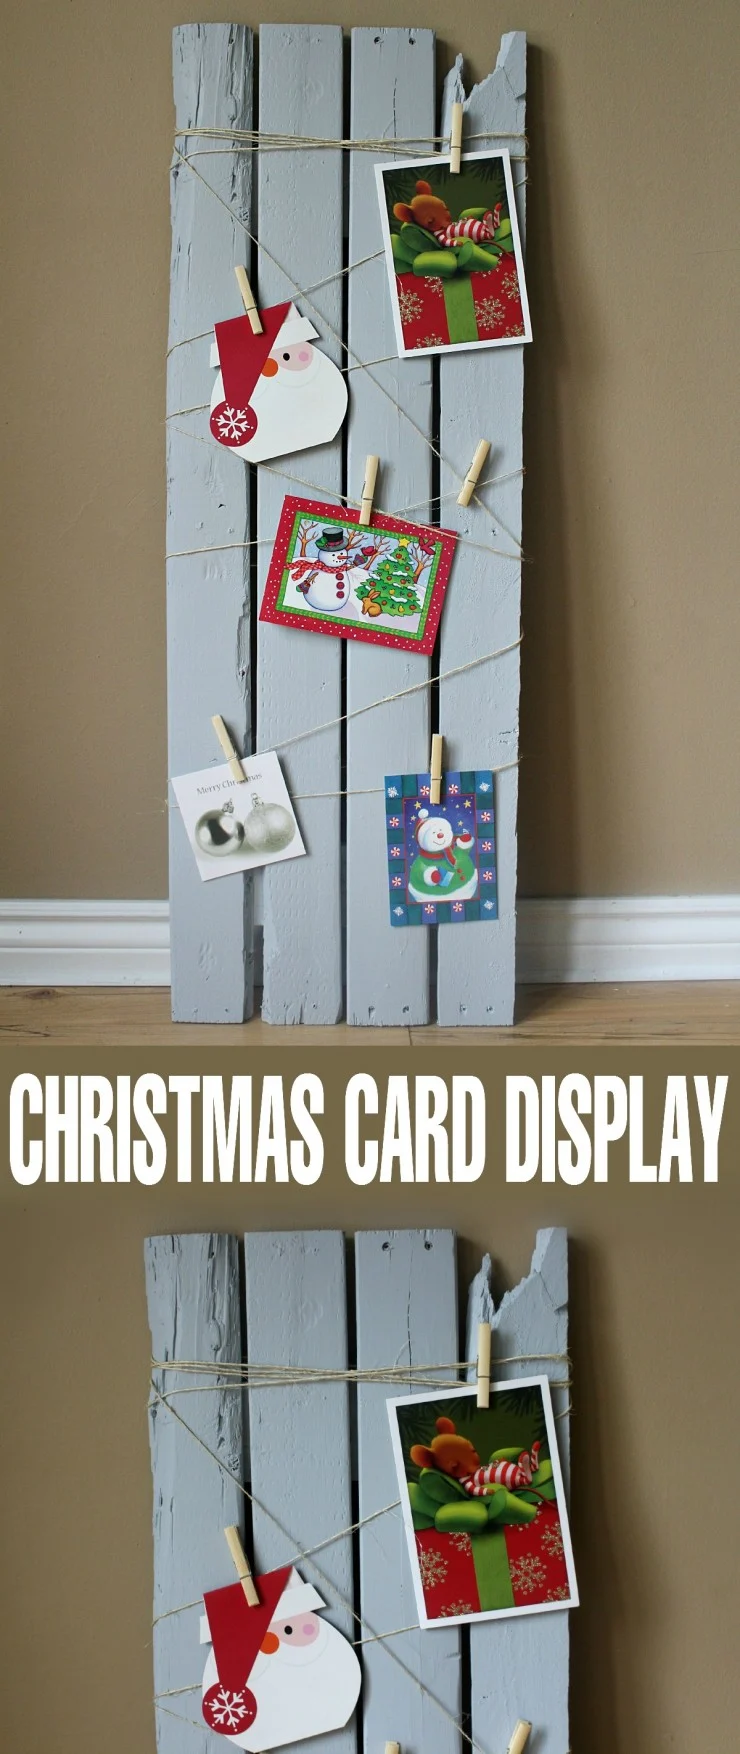 This DIY Christmas Card Display is a great decor idea to help organize your Christmas Cards. Super easy to follow tutorial!